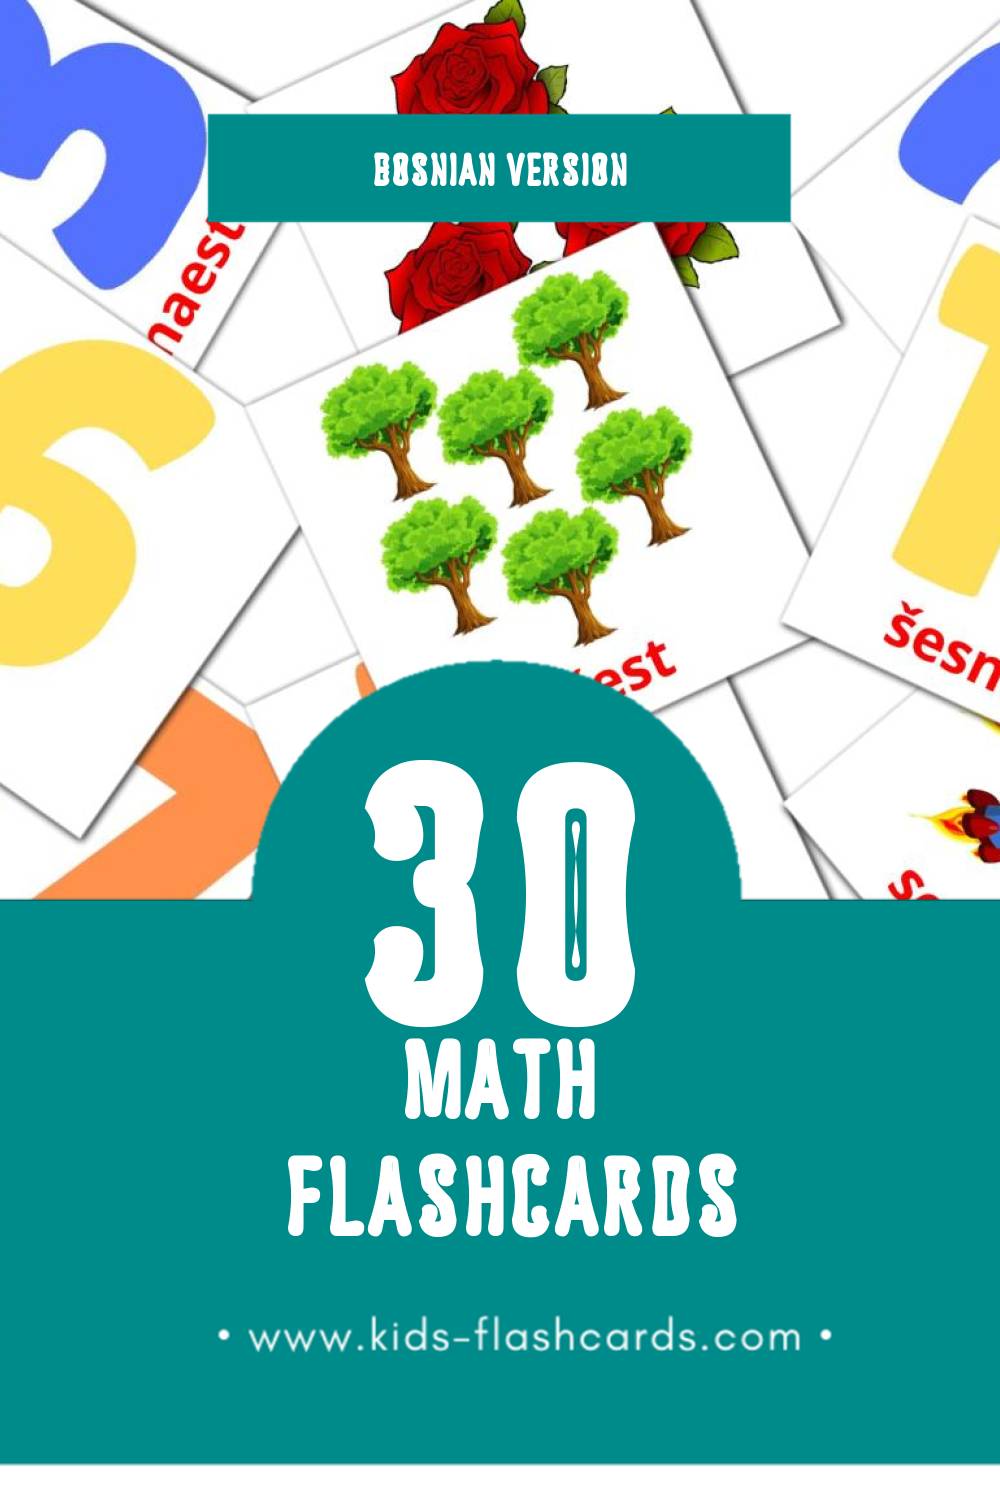 Visual Maths Flashcards for Toddlers (30 cards in Bosnian)